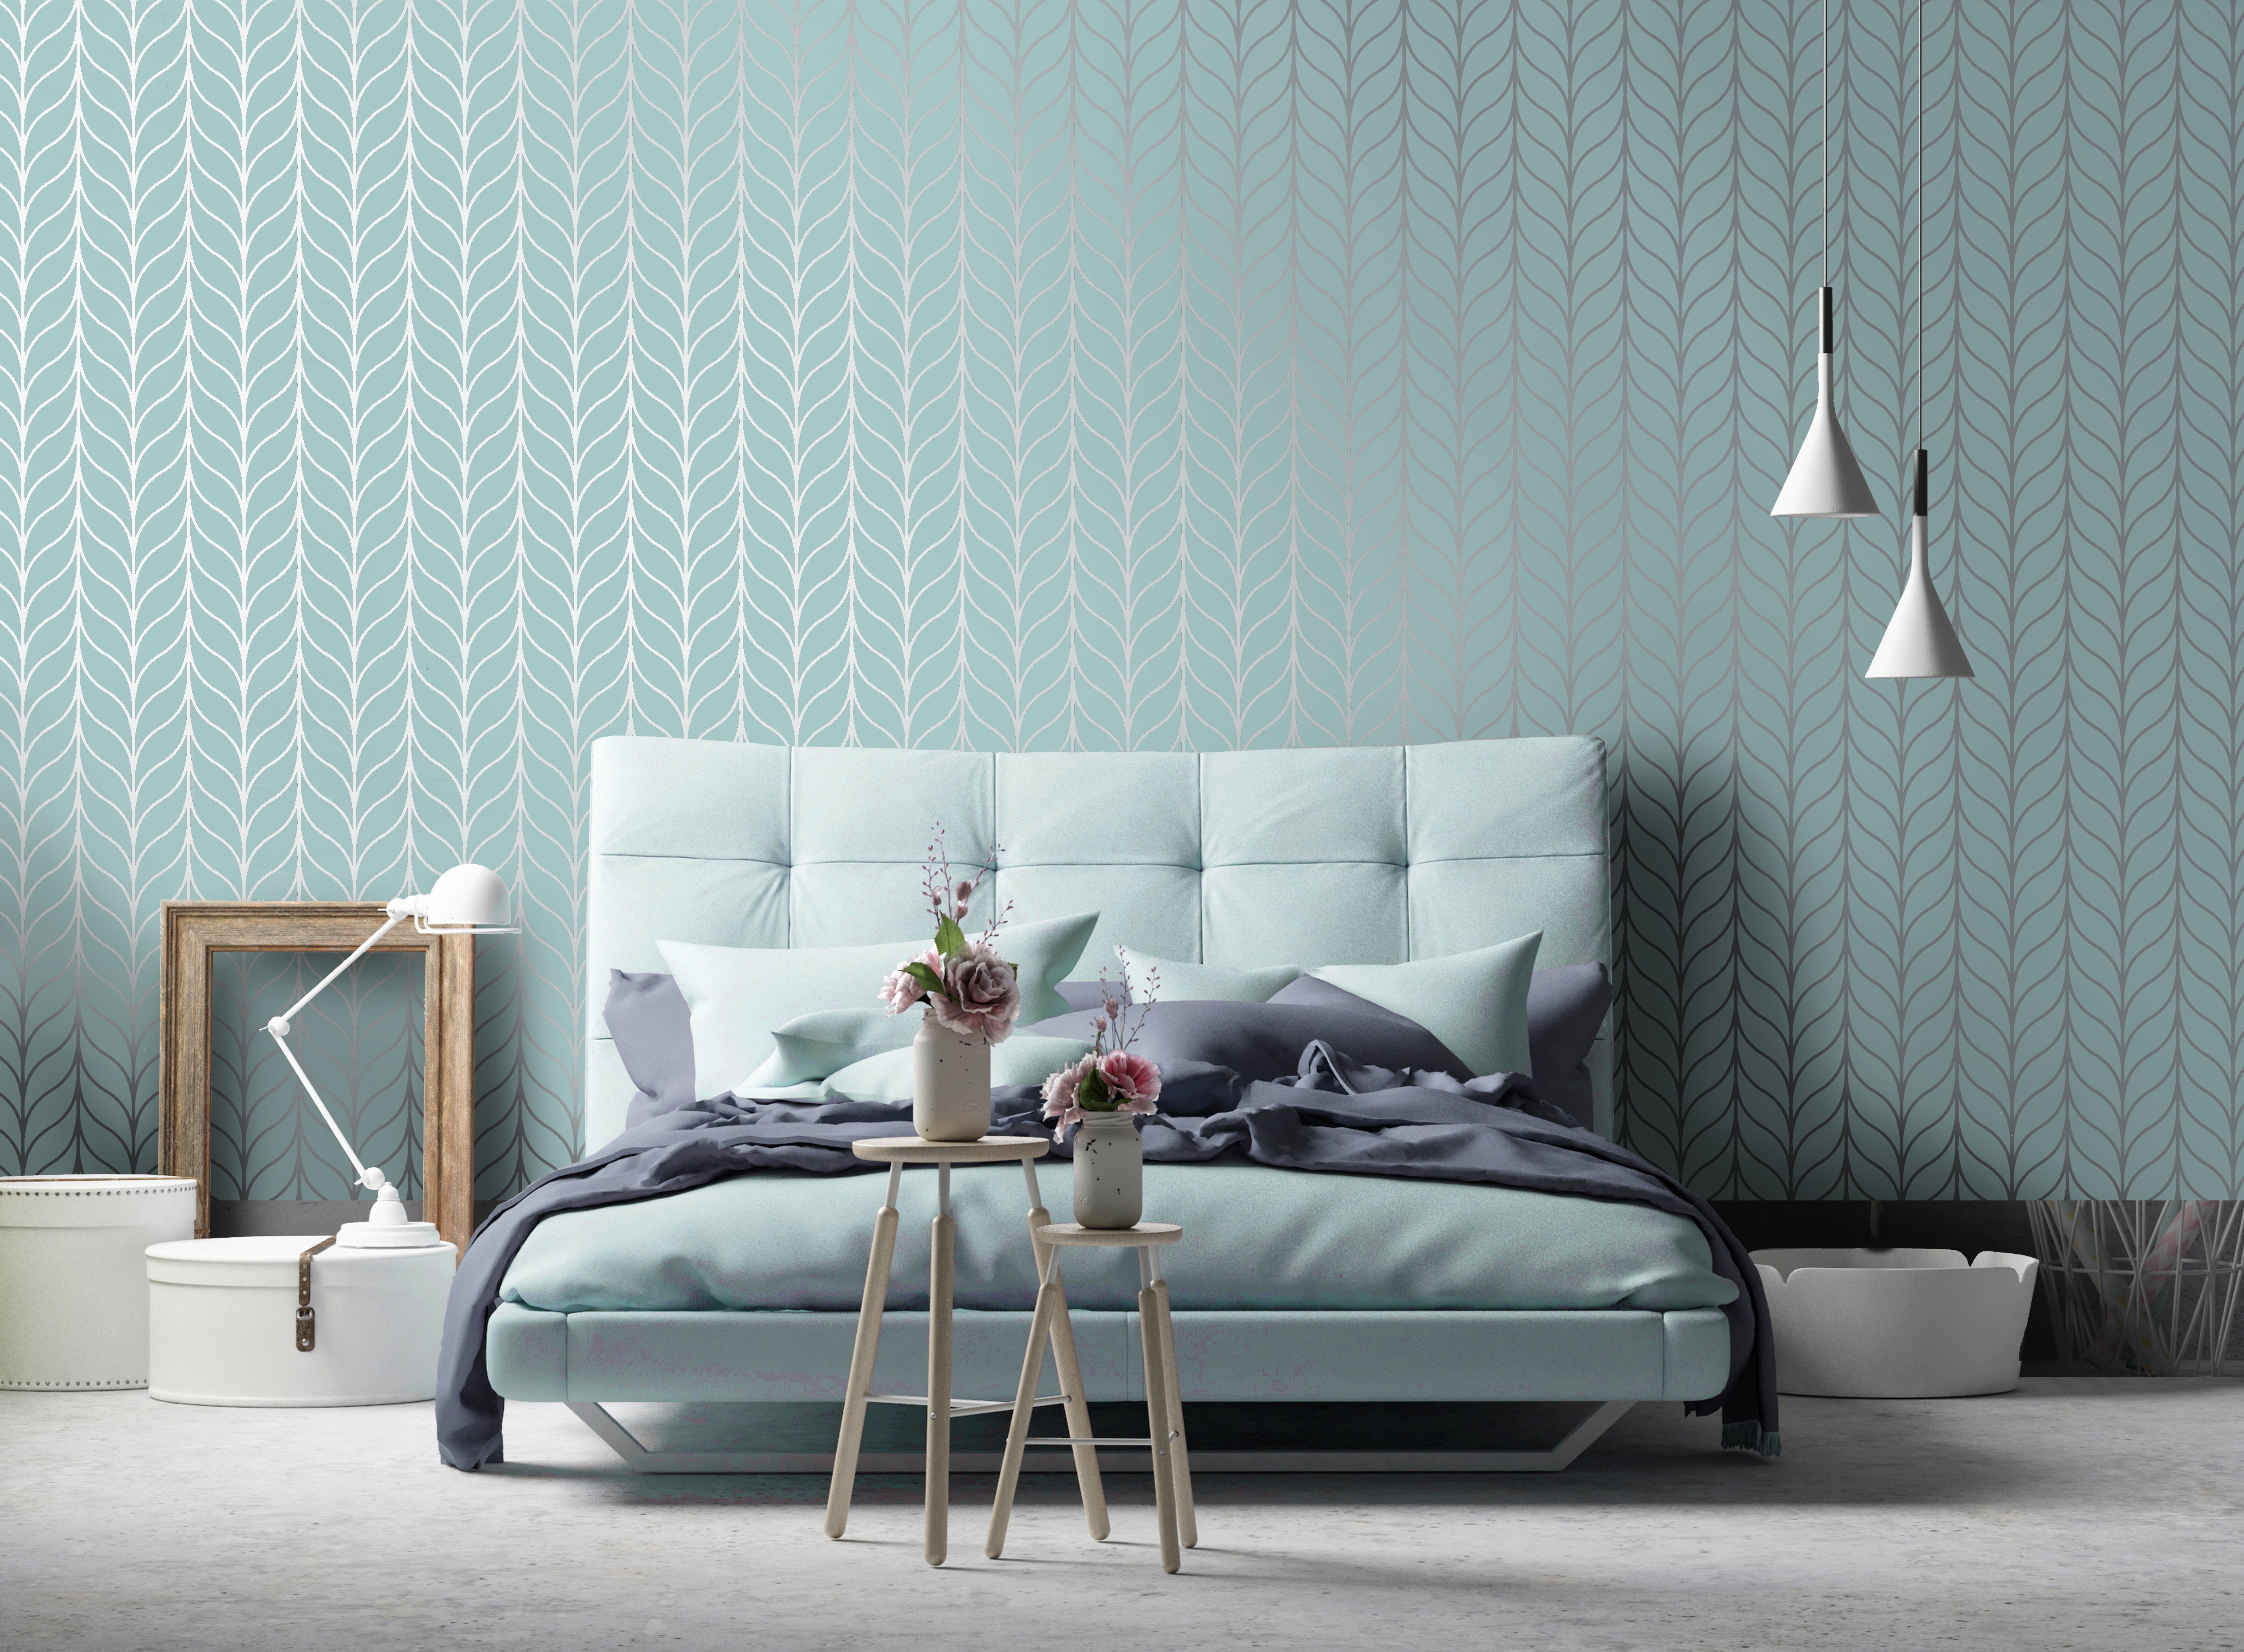 How To Use Neo Mint - Holden Shimmering Geo Striped Wallpaper Art Deco Trellis , HD Wallpaper & Backgrounds